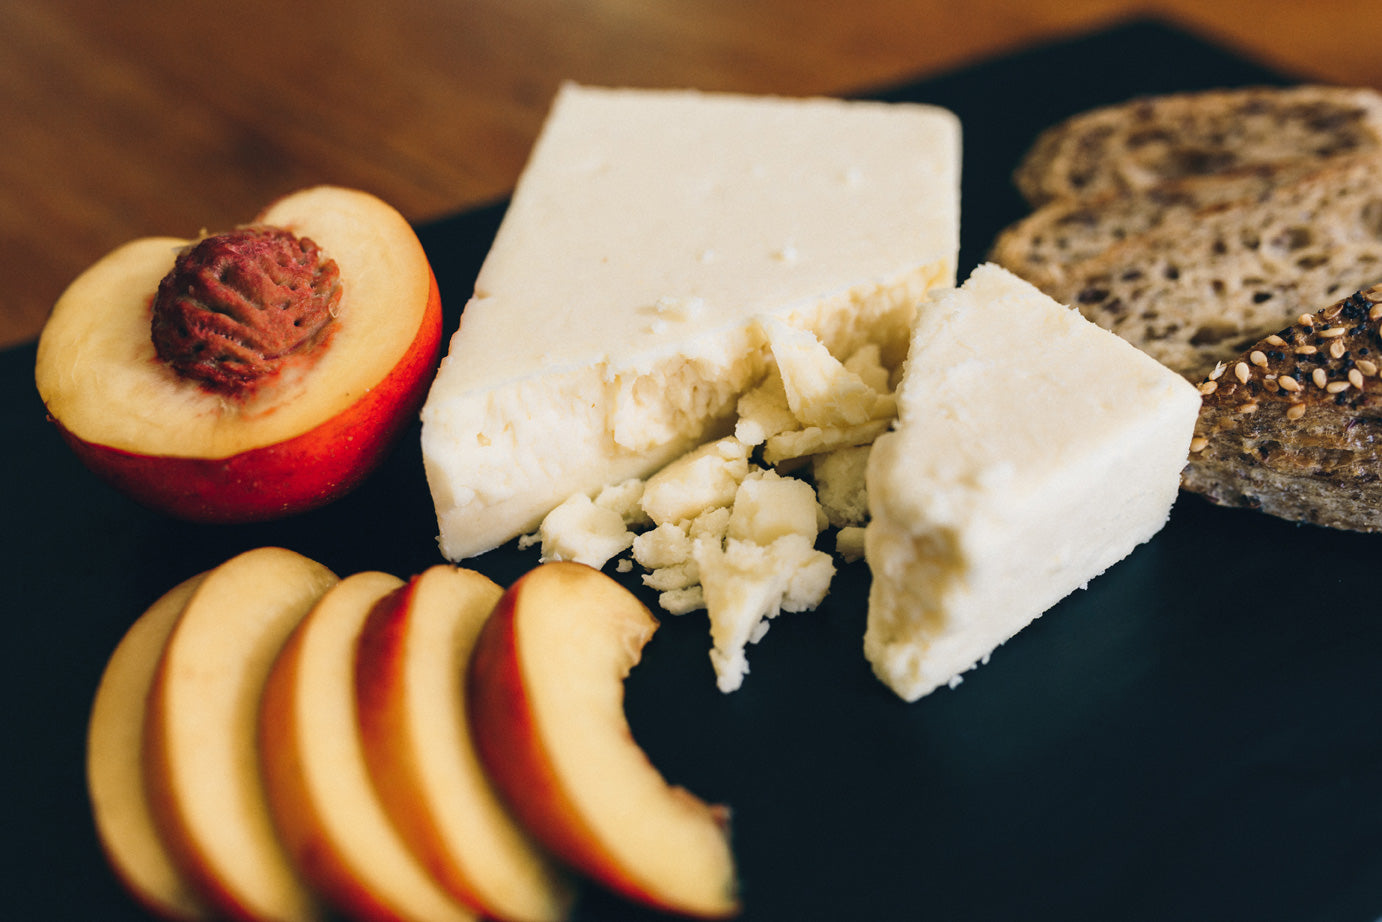 Caerphilly cheese is served on a slate with sliced peach and a seedy bread. The cheese shows a moist crumbly texture.